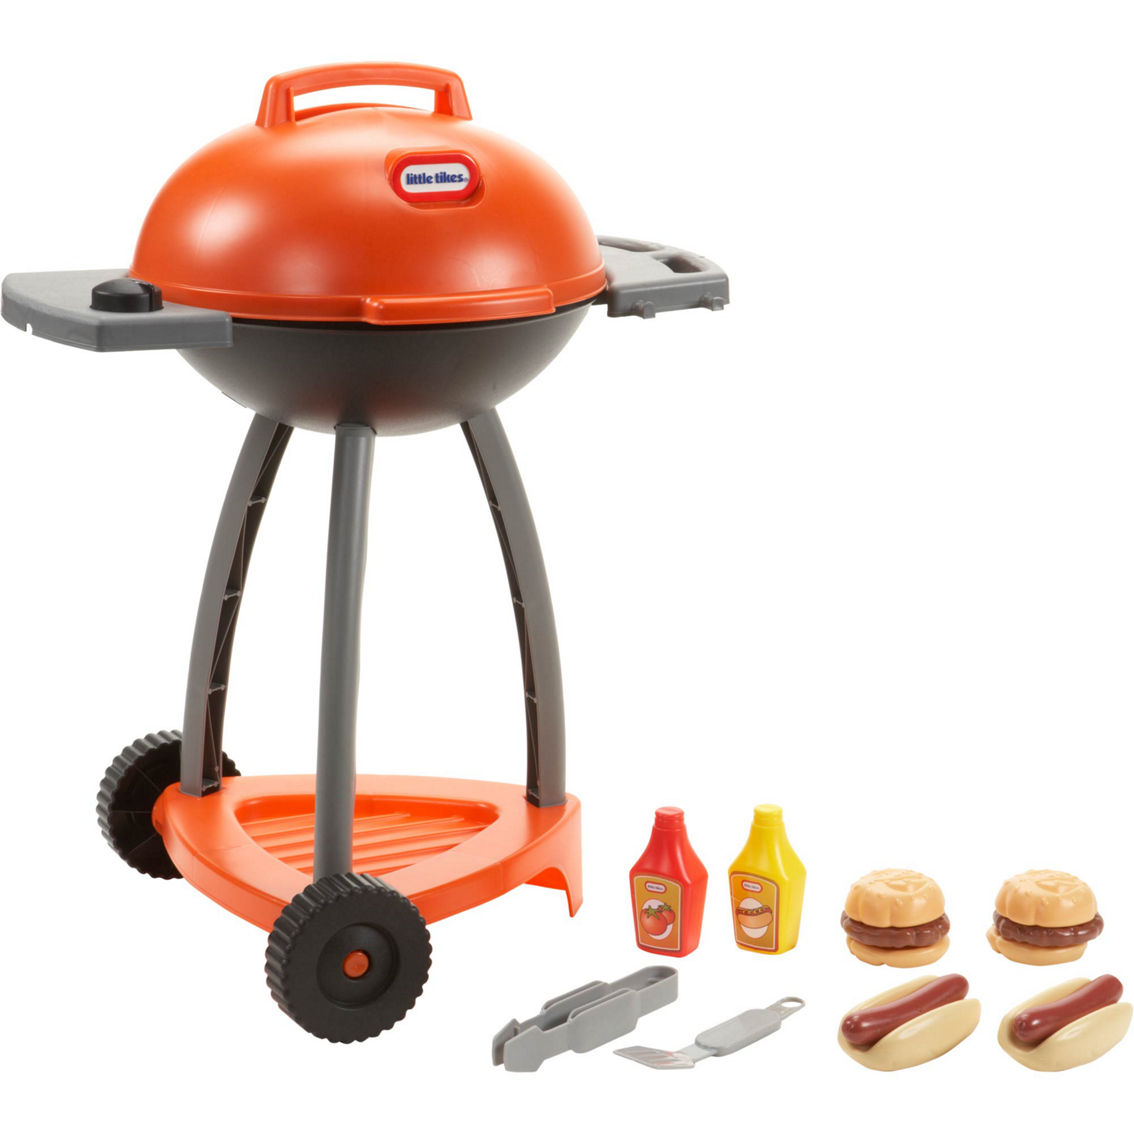 Little Tikes Sizzle N Serve Grill - Image 2 of 3